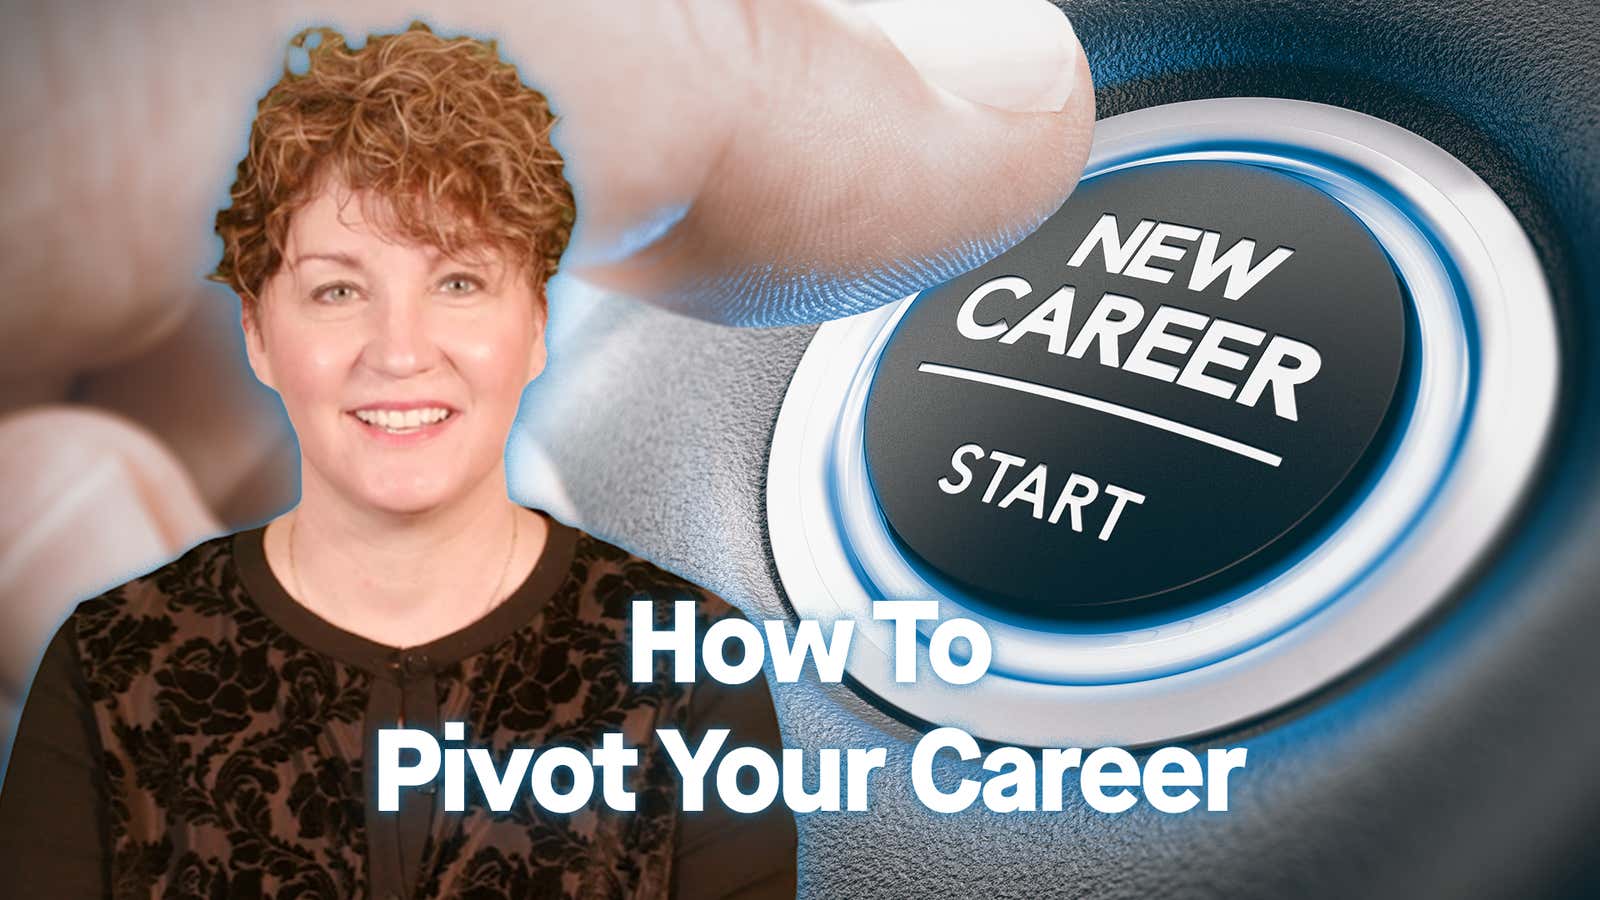 This tool can help you get ready for your next career move